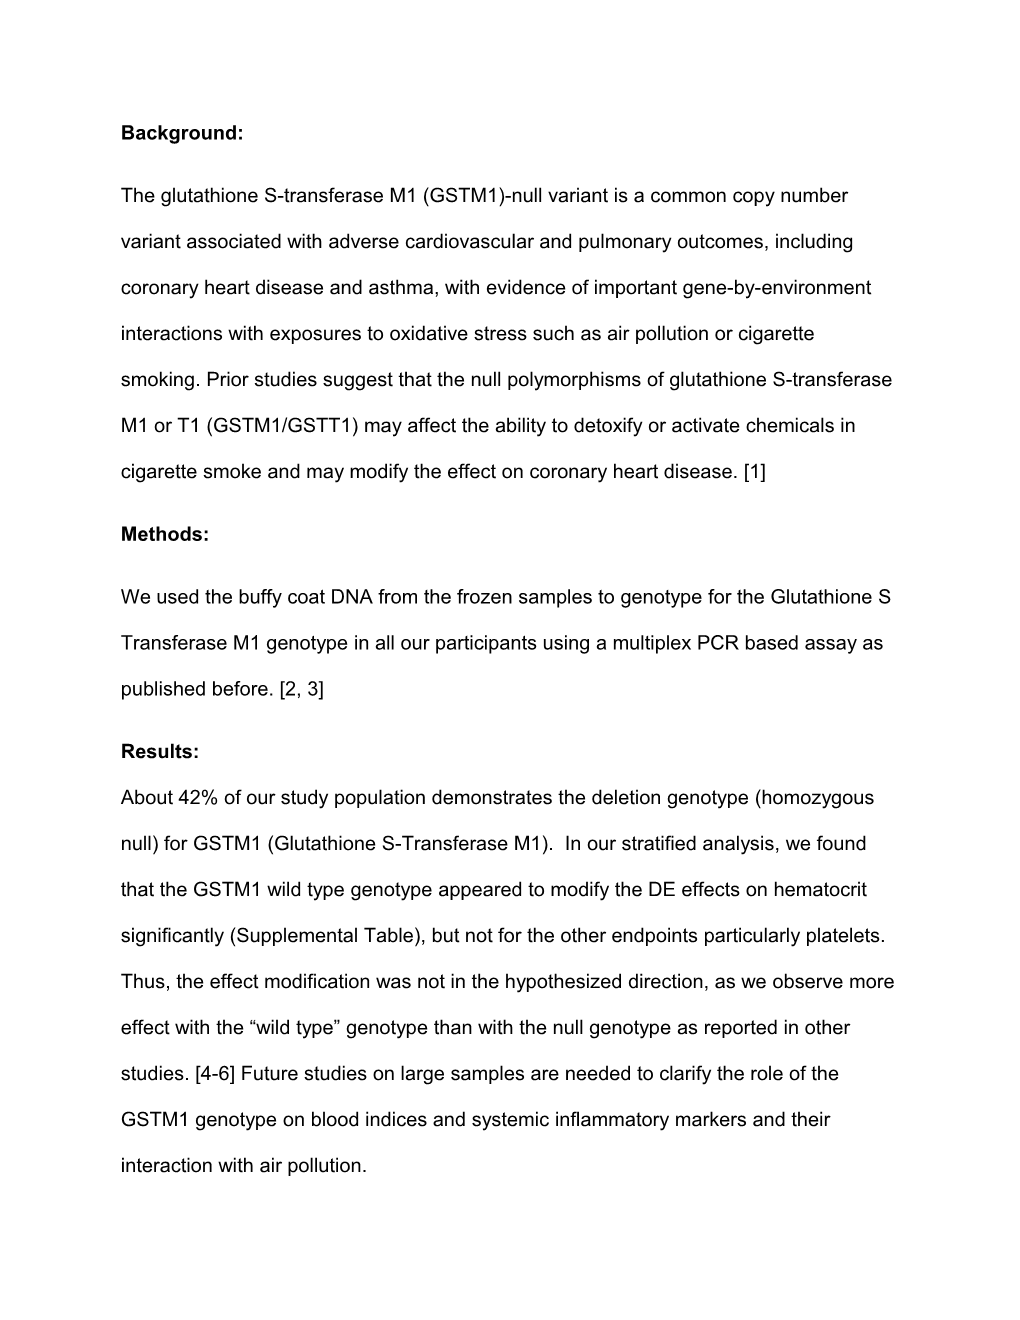 A Randomized Cross-Over Study of Inhalation of Diesel Exhaust, Hematological Indices